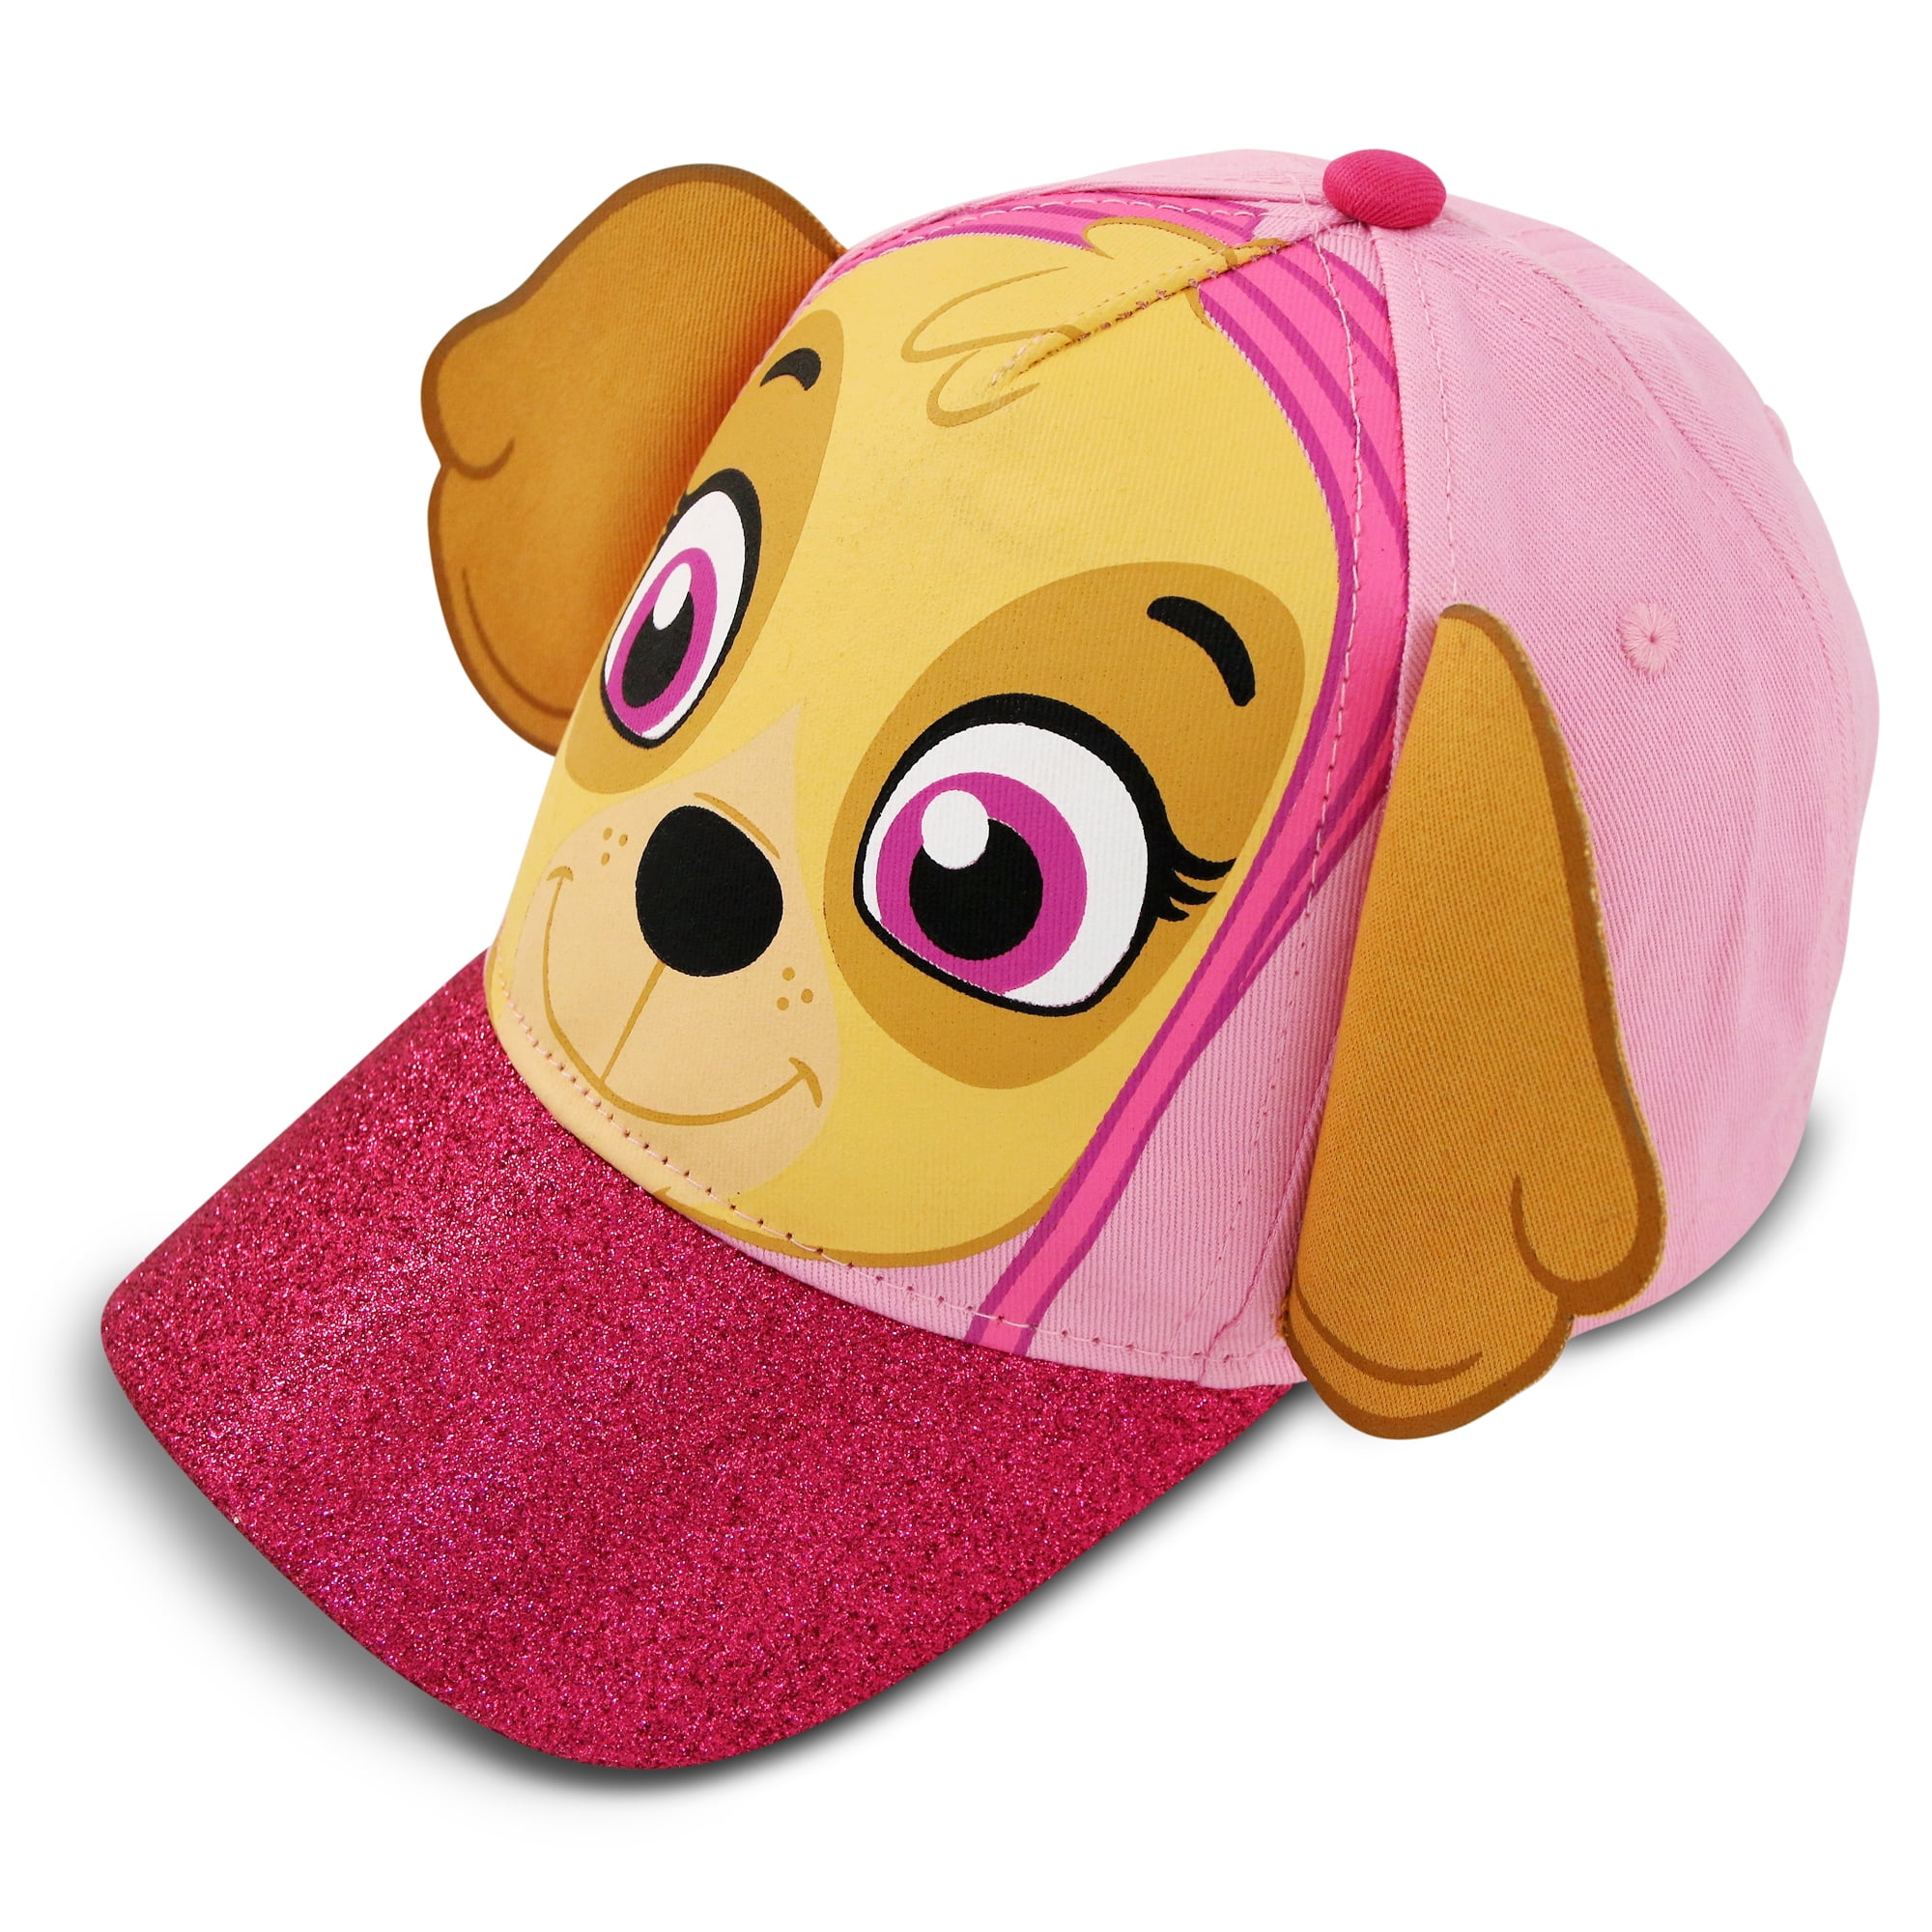 BNWT Brand New Official Paw Patrol Pink Bobble Hat Soft Warm Lining 3 4-8 Years 